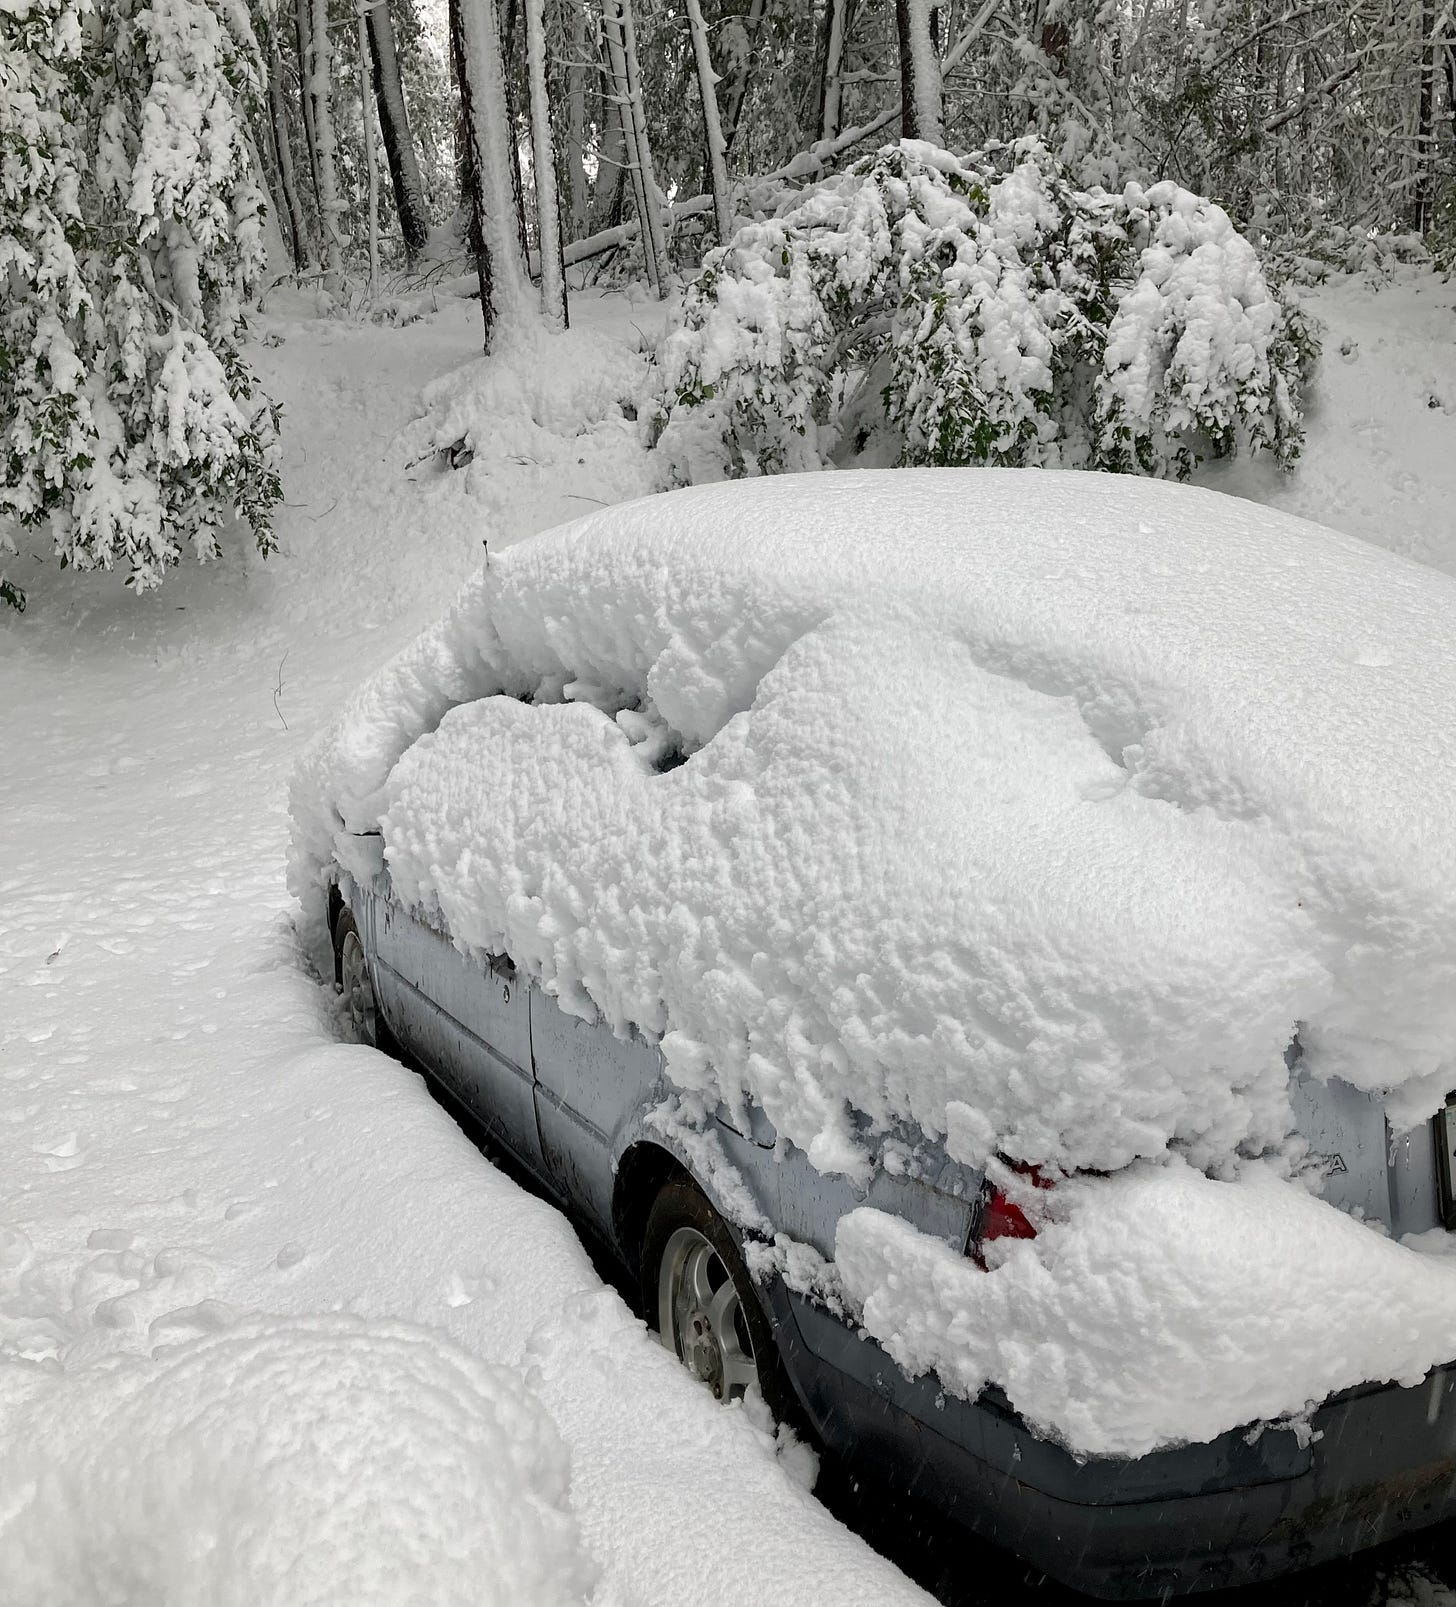 My car is buried under snow